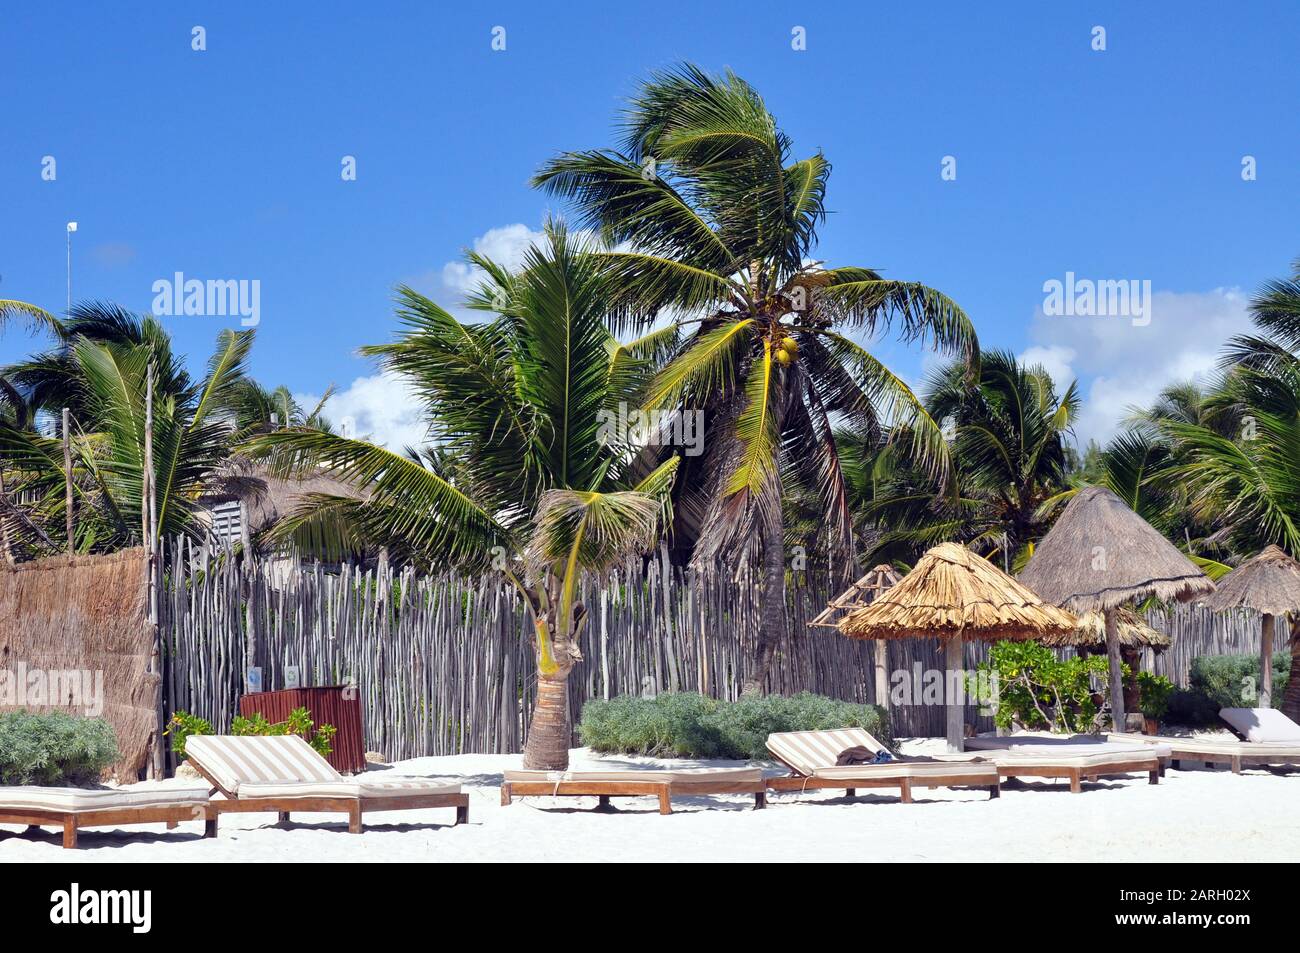 A Scene on the Beach with Double Lounge Chairs, Palm Trees. A Bamboo Fence and thatched Umbrellas. Stock Photo